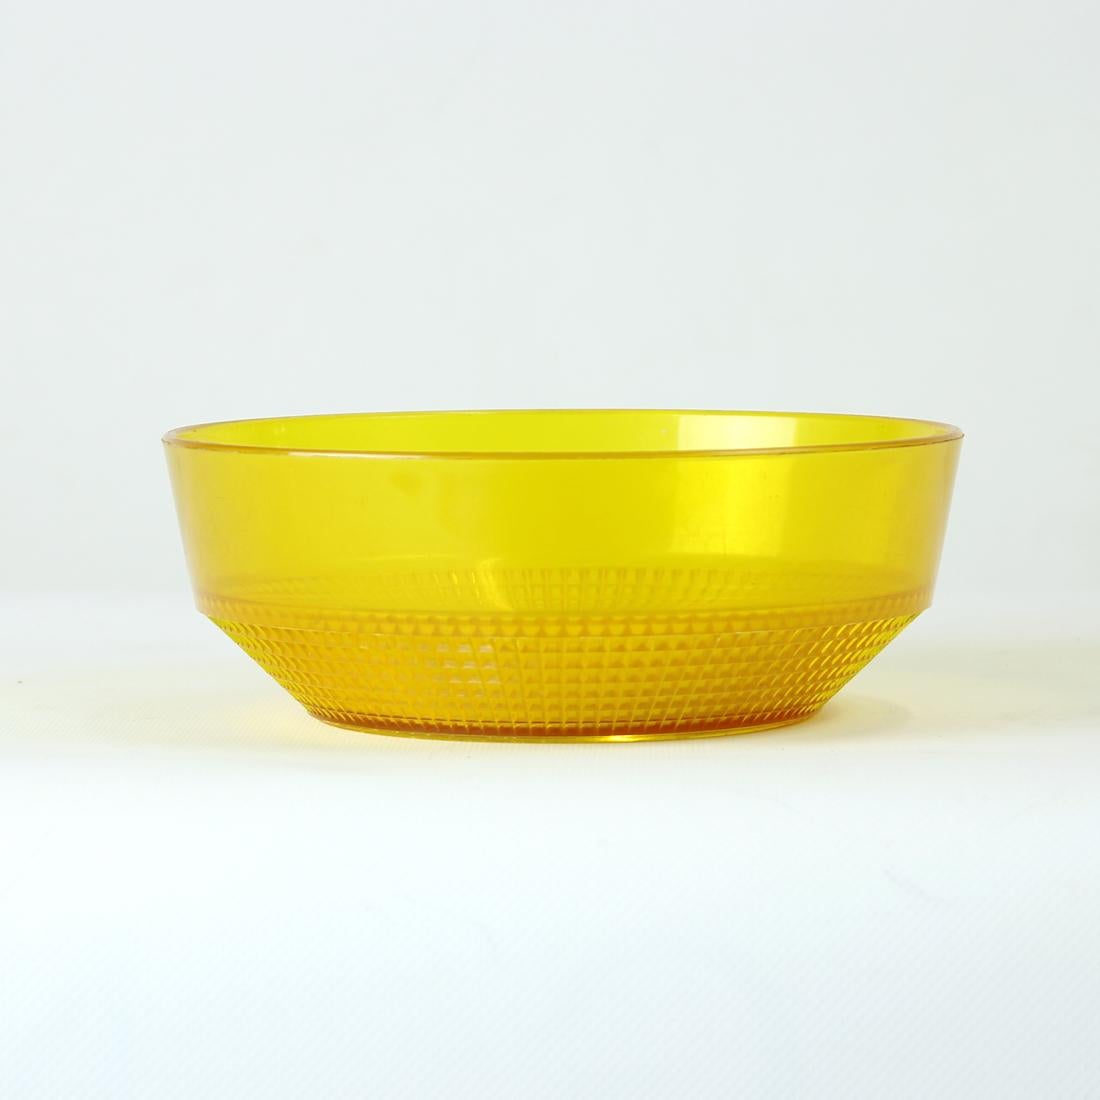 Great orange plastic bowl made of a strong, hard plastic. Produced in Czechoslovakia in 1960s. very good vintage condition. Minor use wear, no damages. Beautiful shape and details. Ready to shine in any interiors.